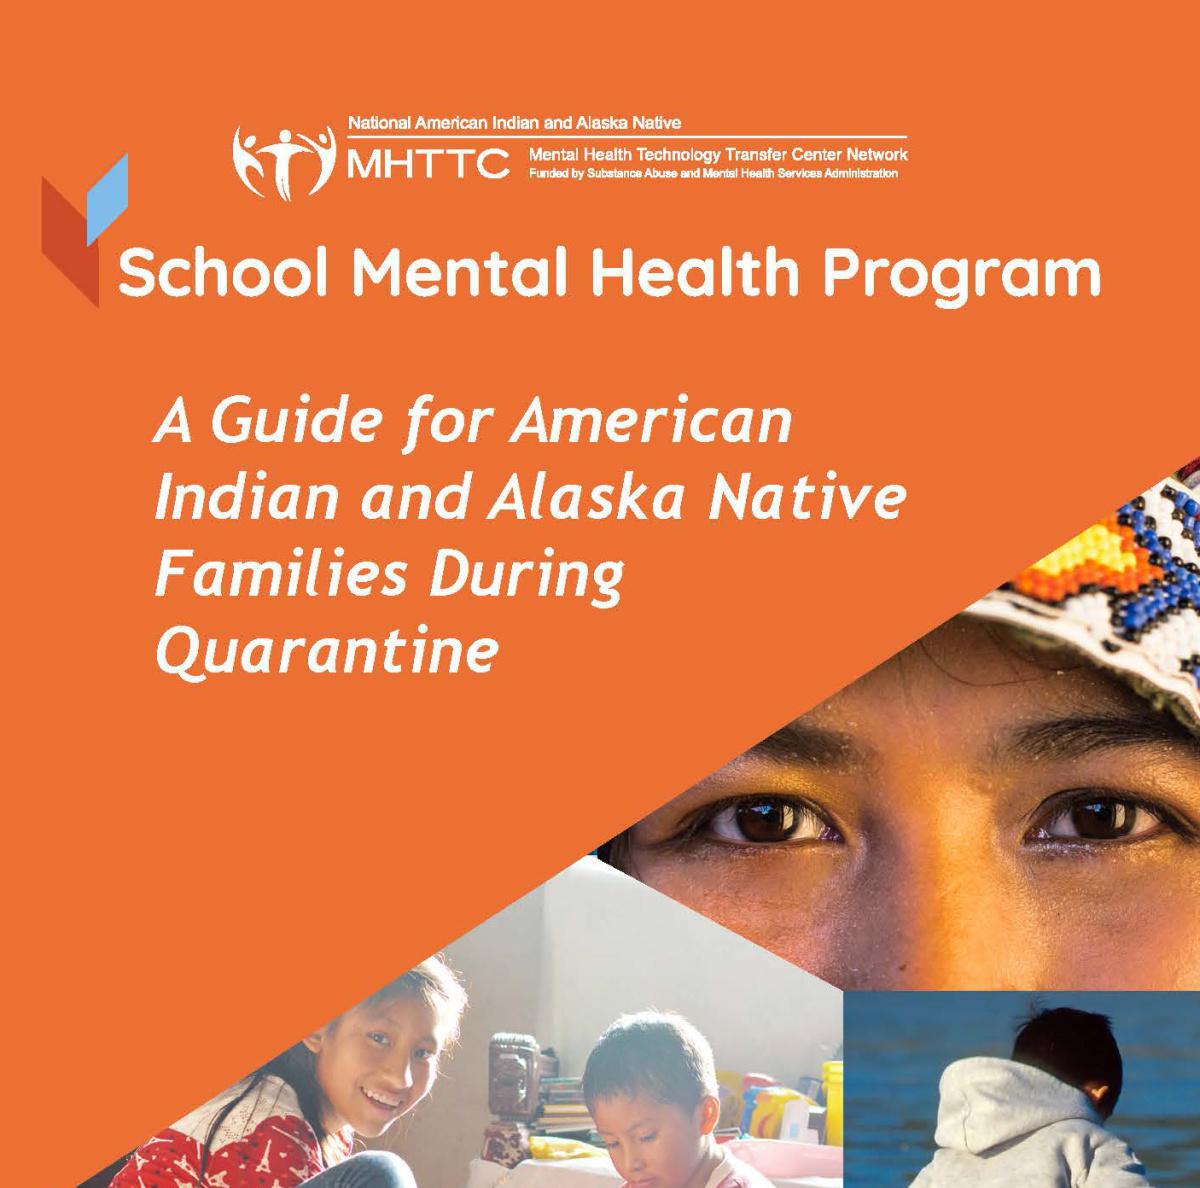 A Guide for American Indian and Alaska Native Families During Quarantine